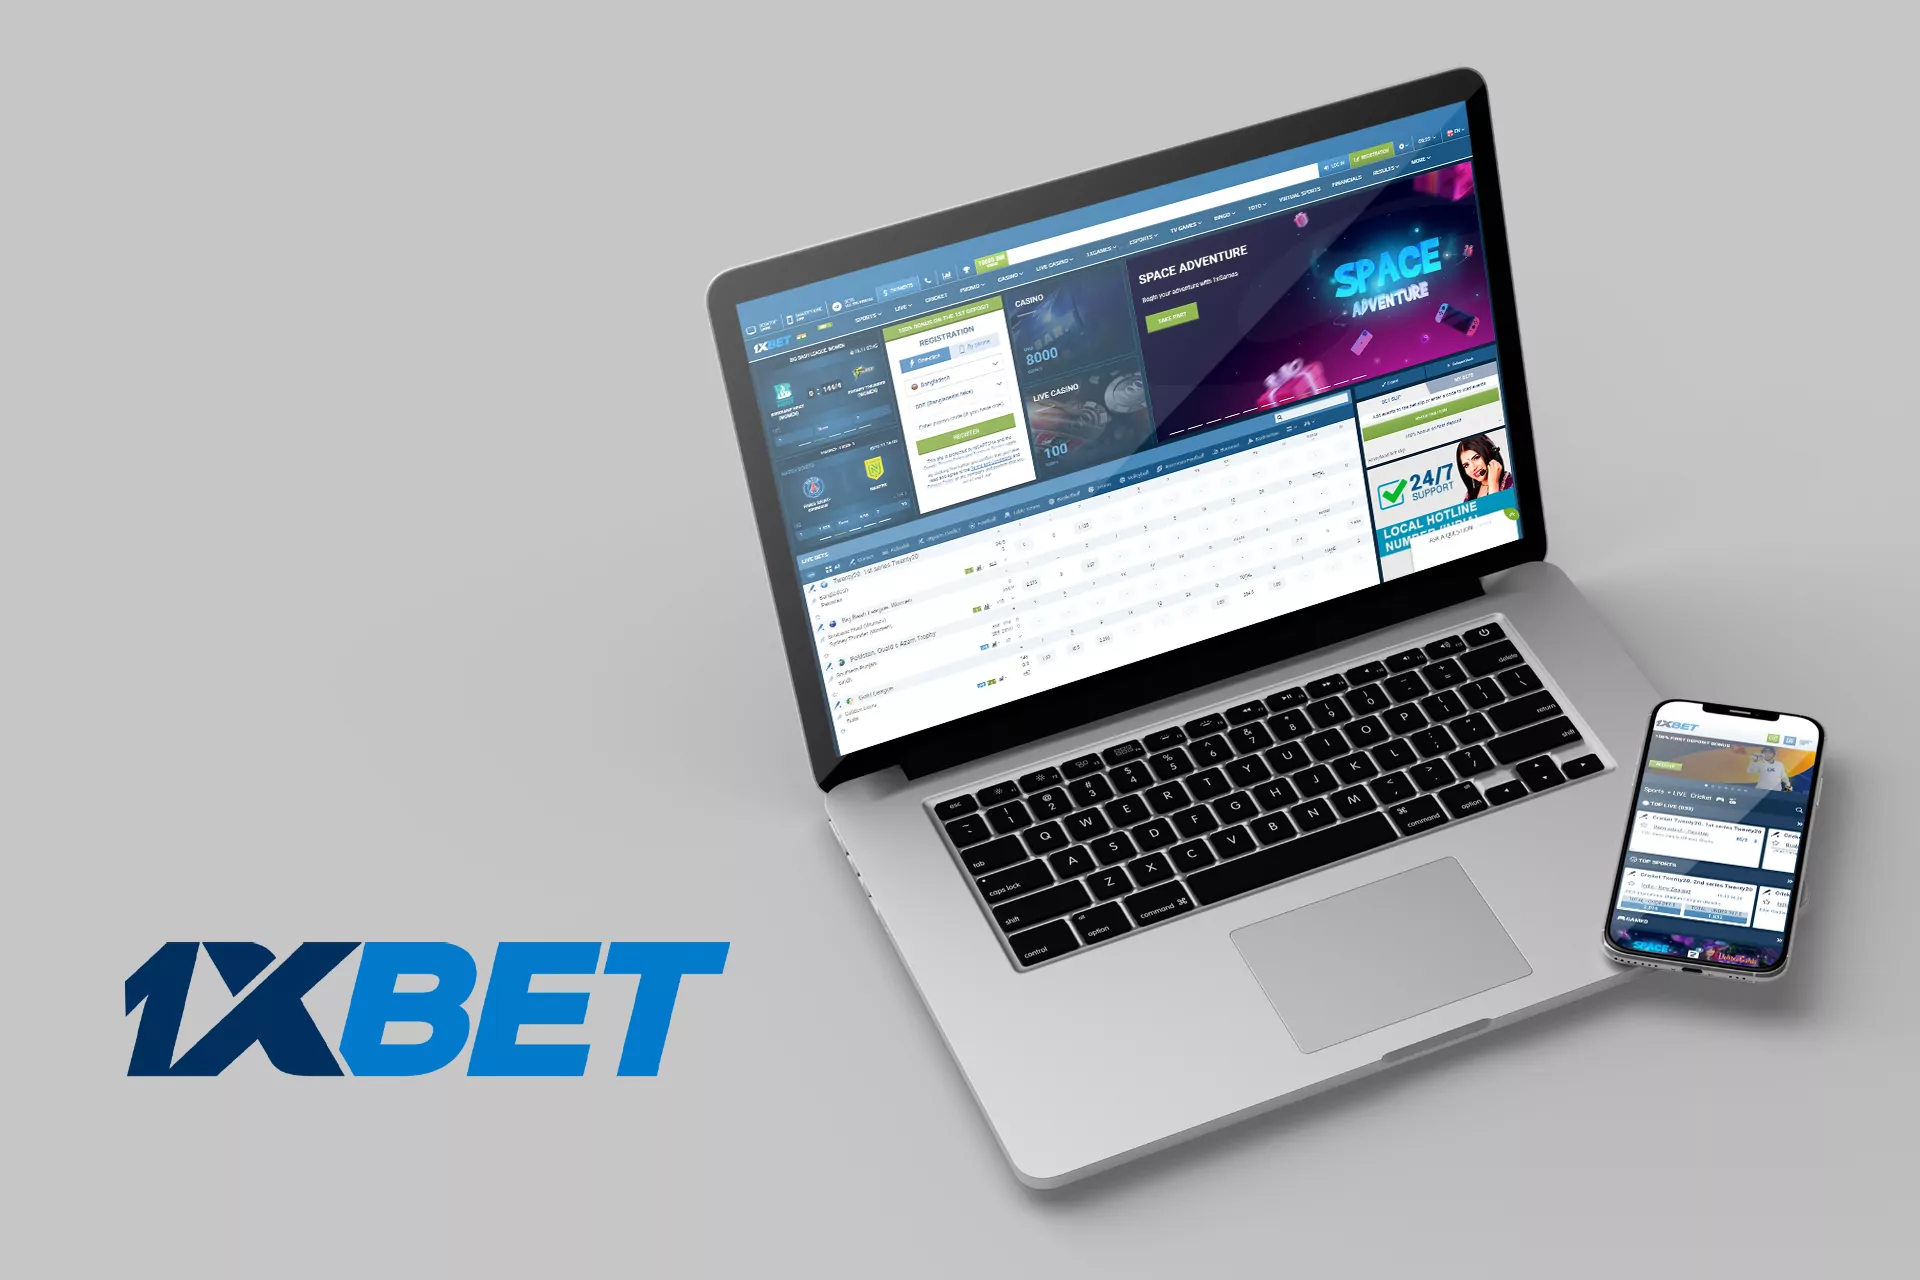 1xbet is one of the biggest online bookmaker in the world.